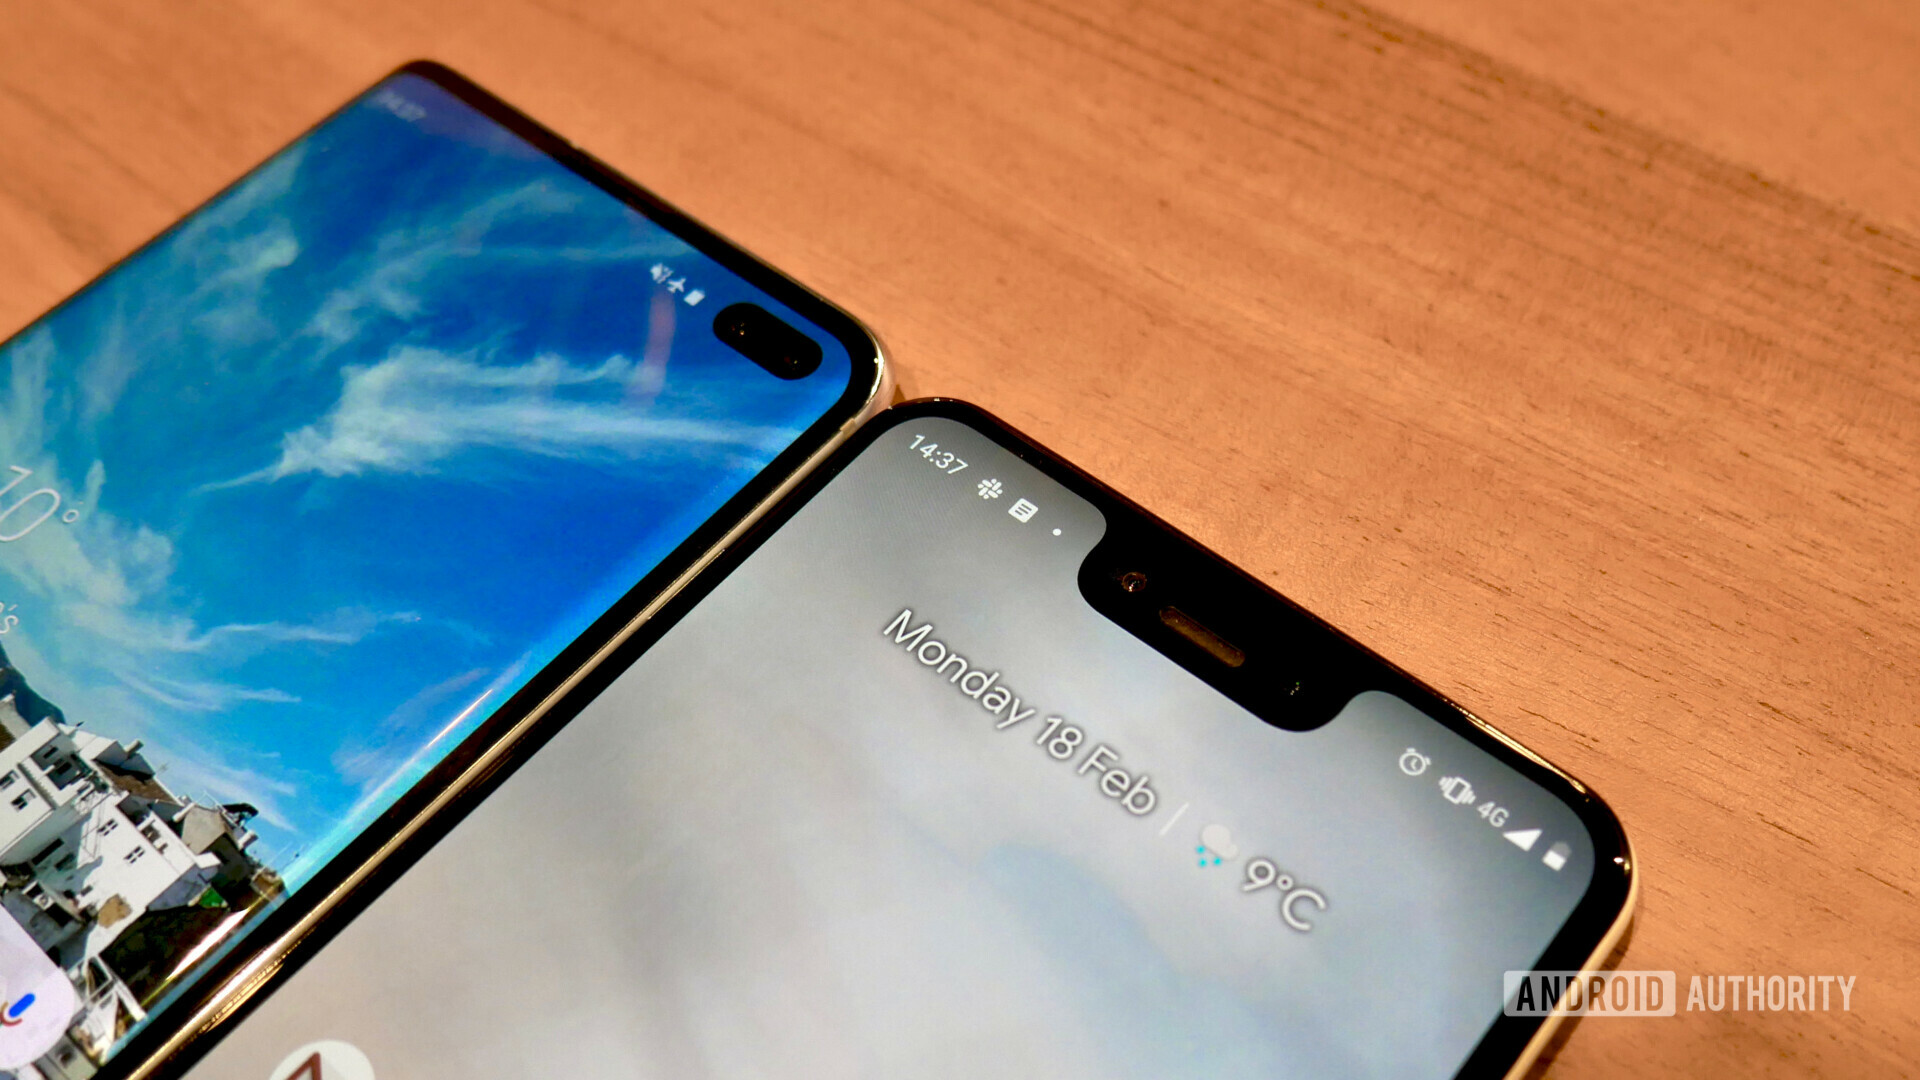 Samsung Galaxy S10 Plus with a punch hole next to a Google Pixel 3 XL with notch 